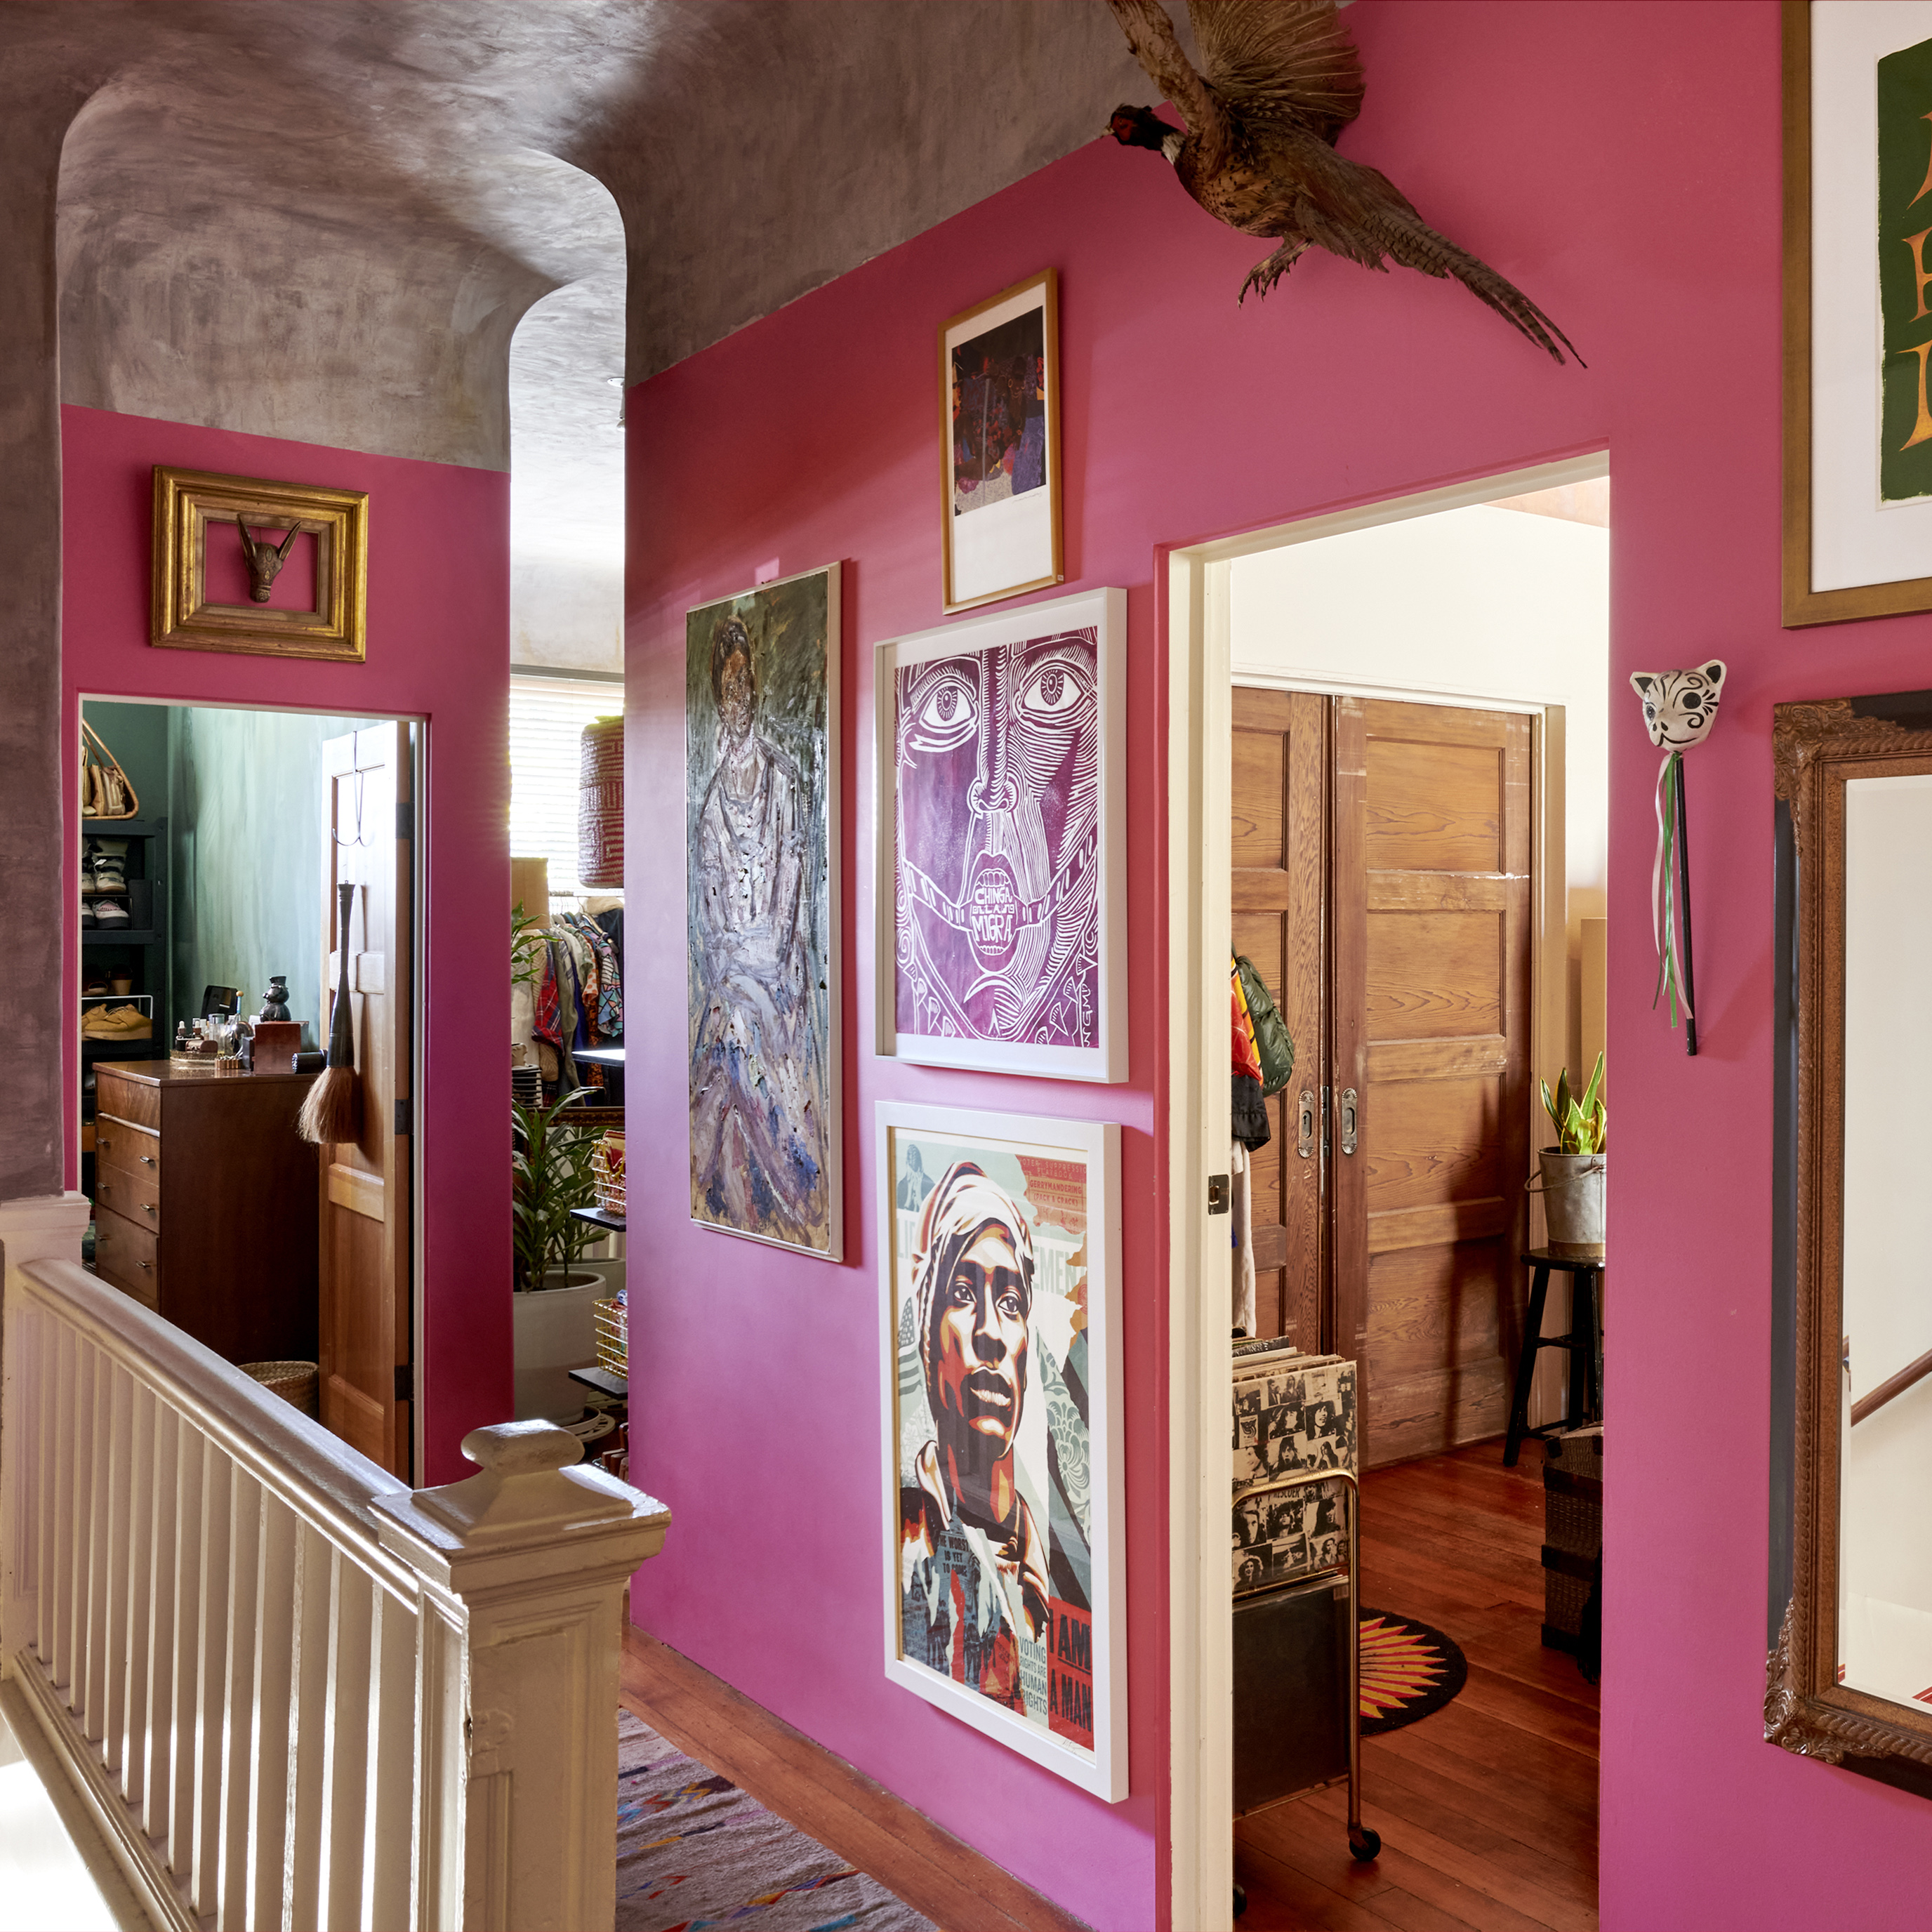 The image shows a vibrant hallway with pink walls adorned with various framed artworks, leading to rooms with wooden doors. A ceiling-high arch is visible on the left side.